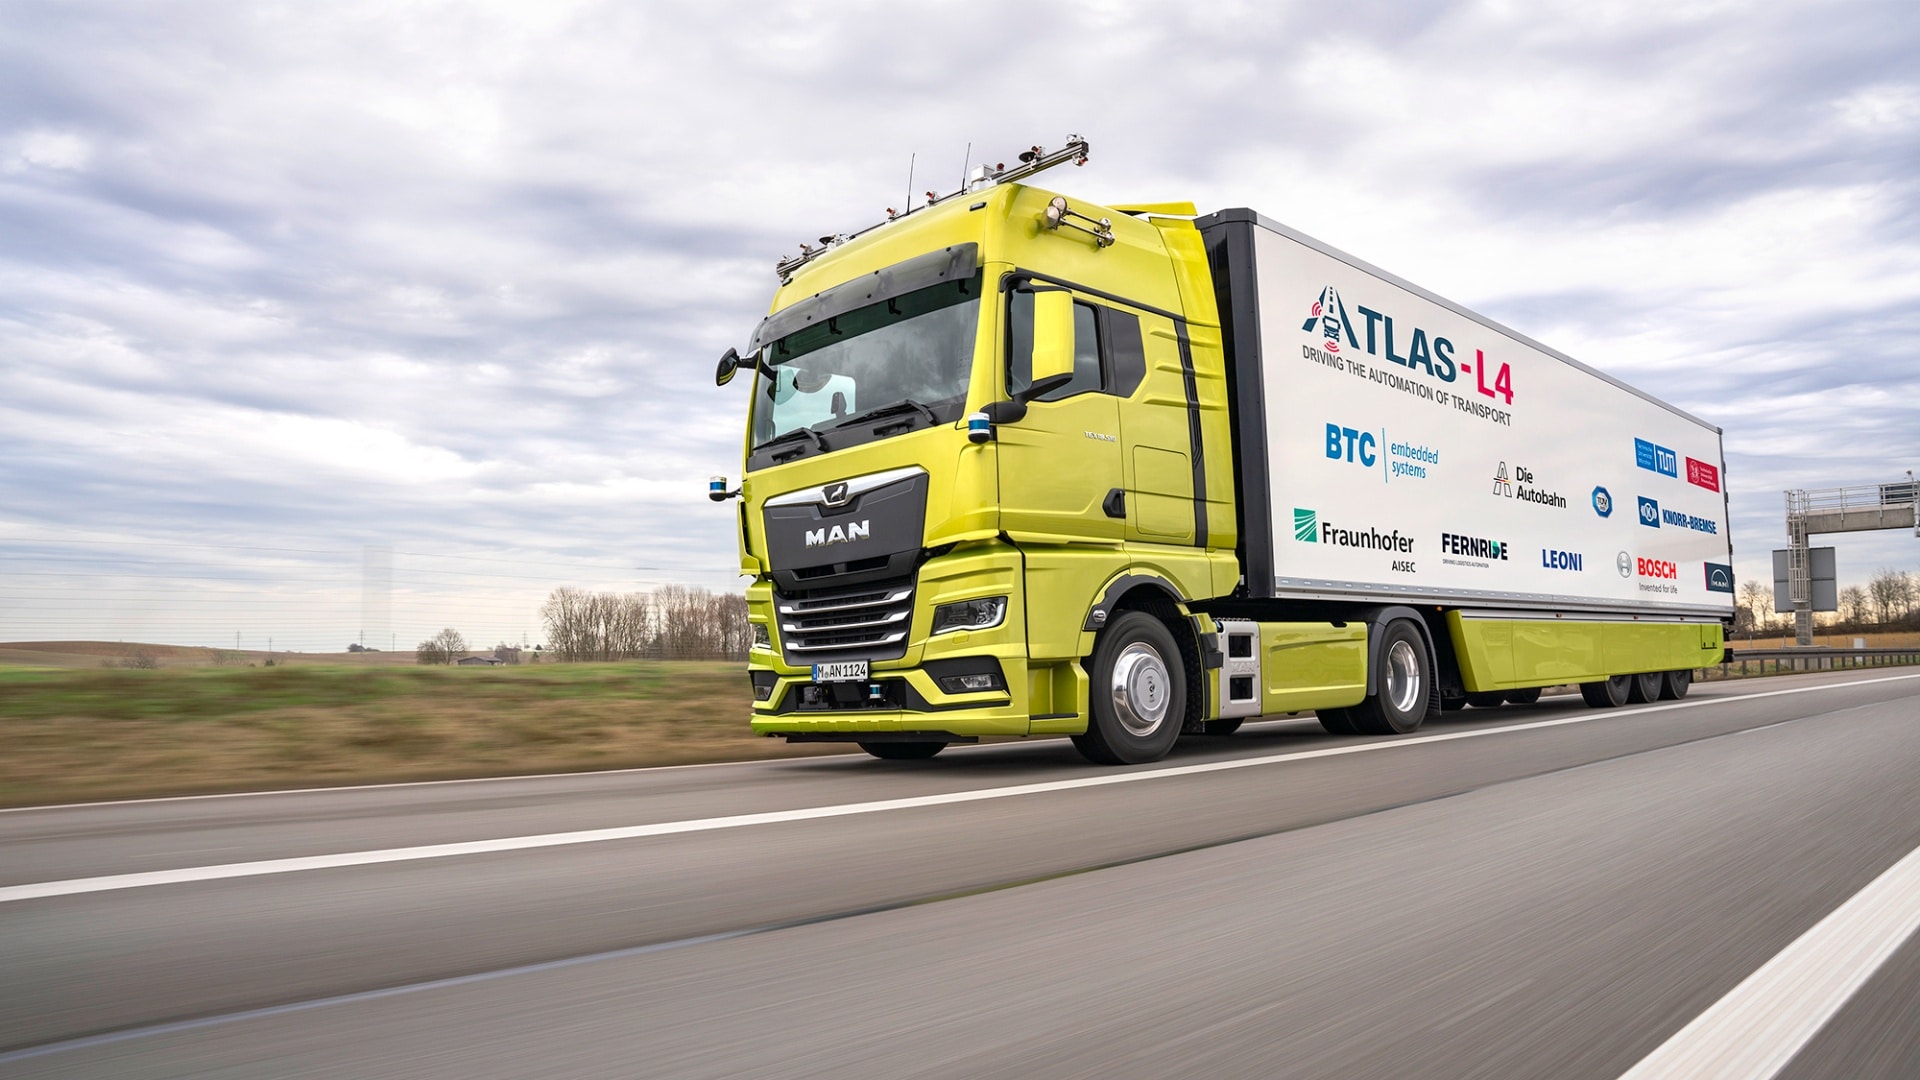 ATLAS-L4 Project hopes to have AV trucks on the road by mid-decade